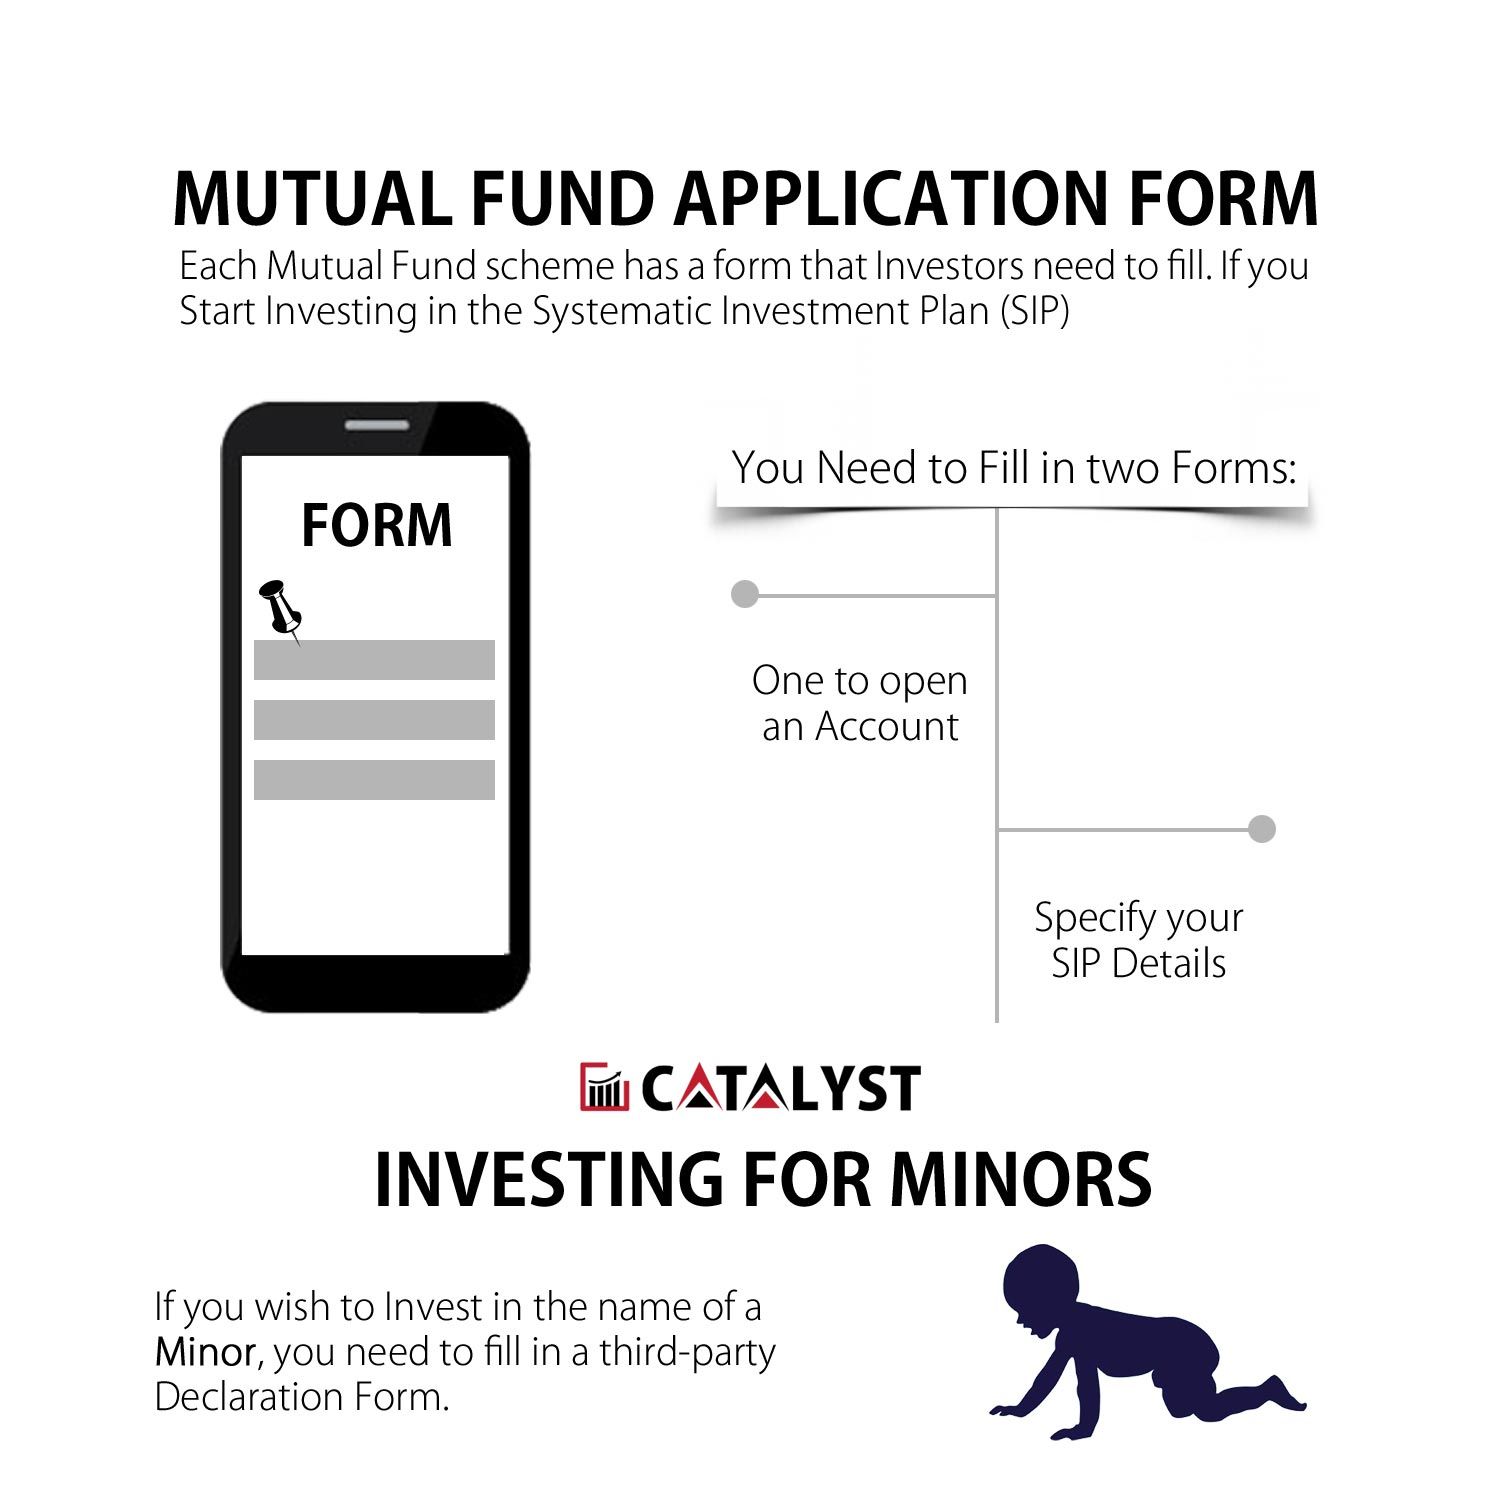 Mutual fund application form